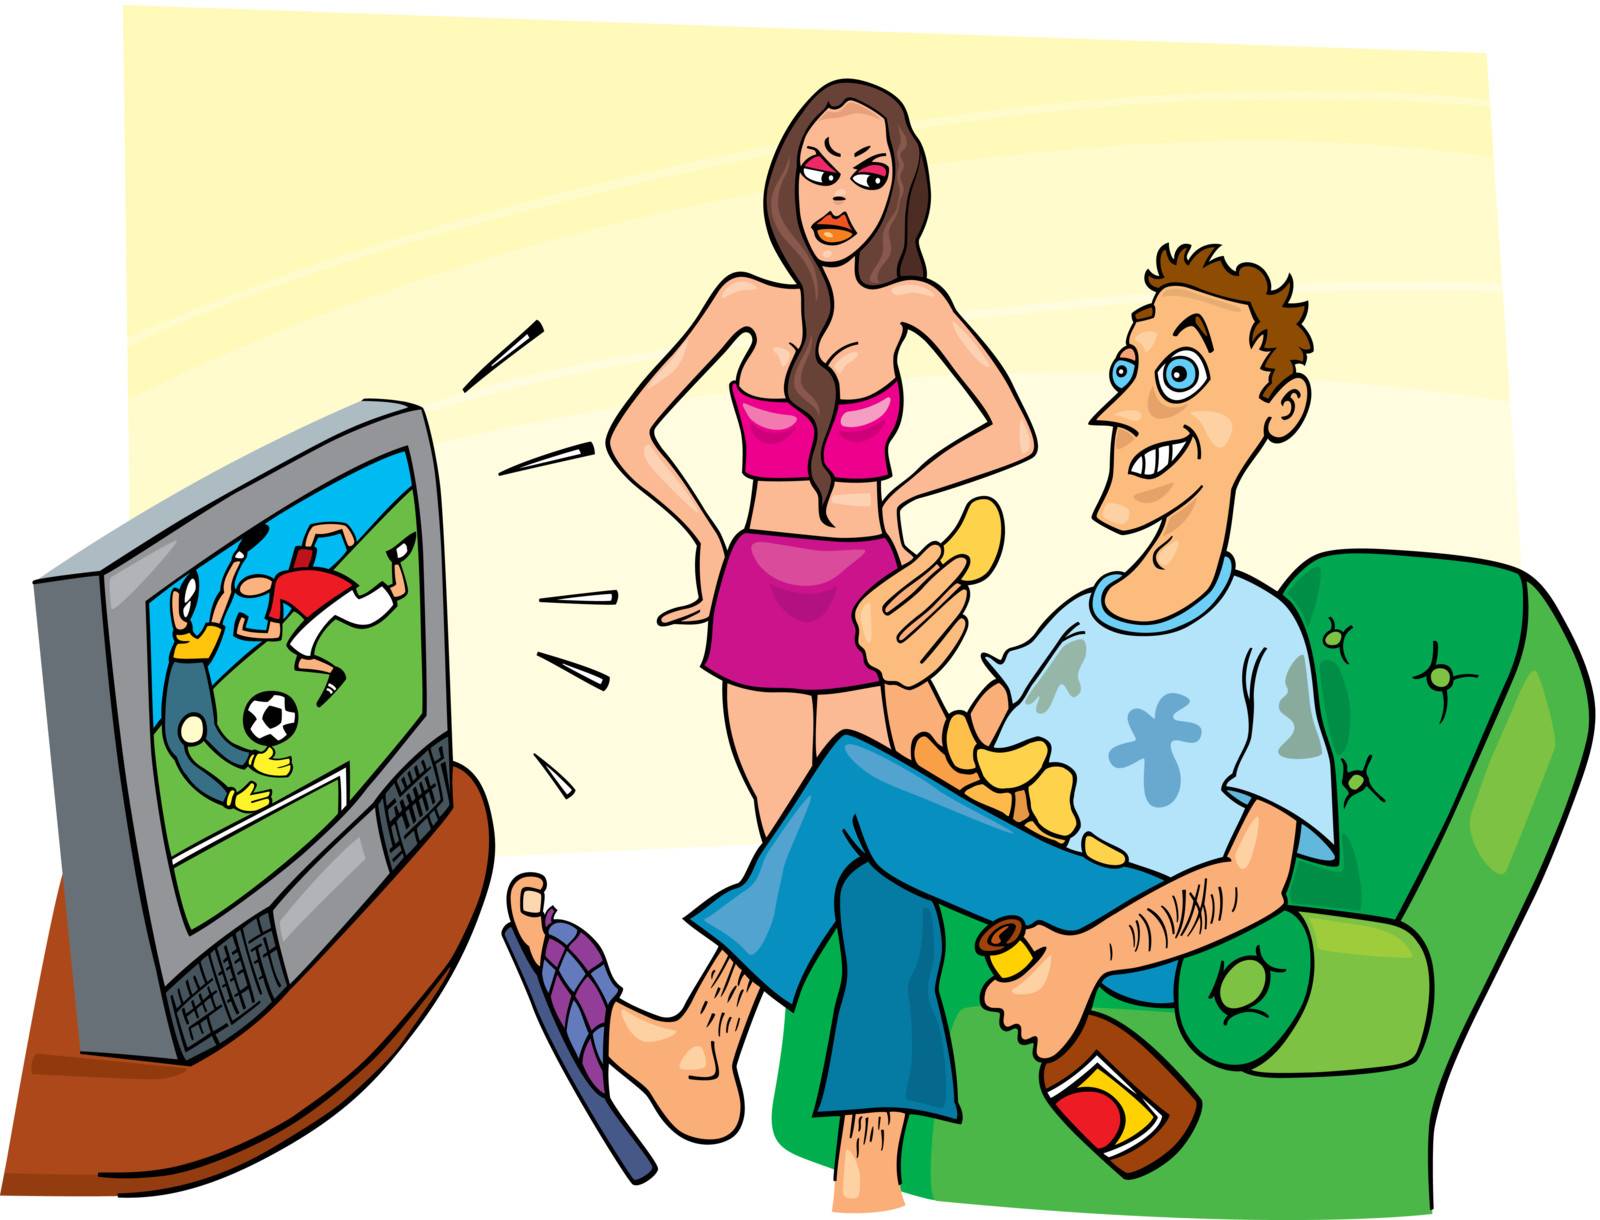 humor vector illustration of sport fan watching match and his angry wife